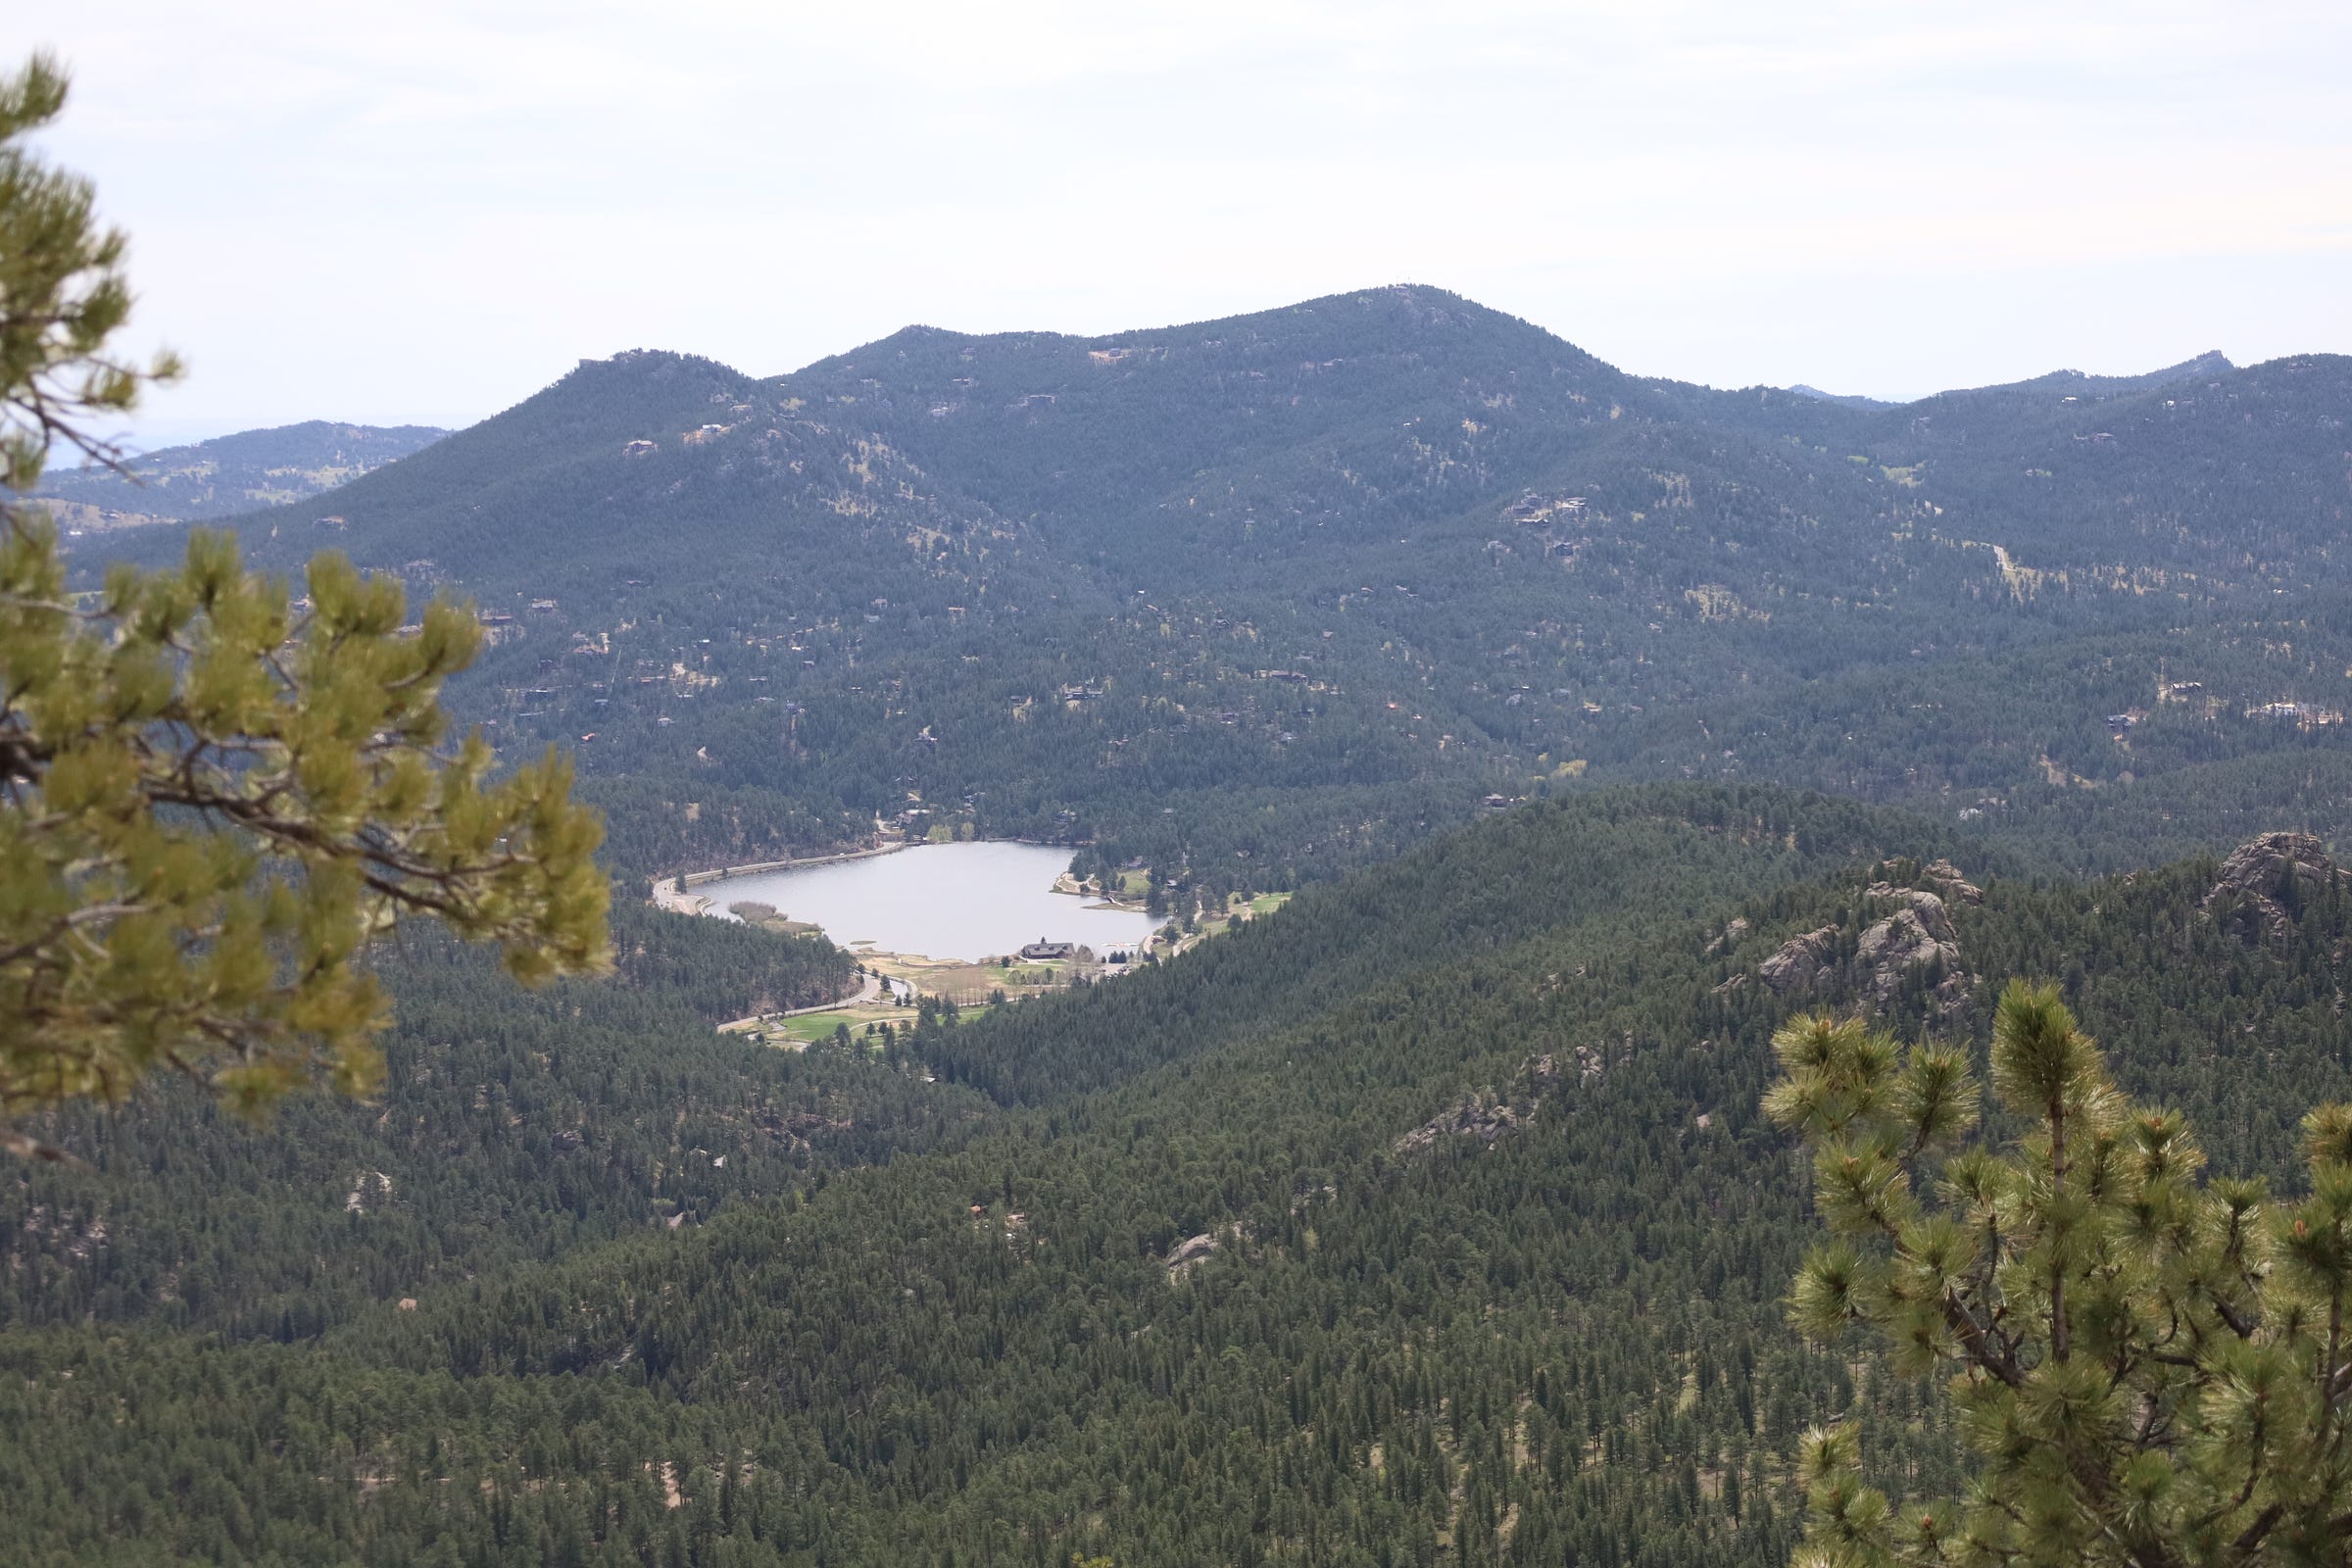 Evergreen lake, nestled between craggy, pine-covered mountains